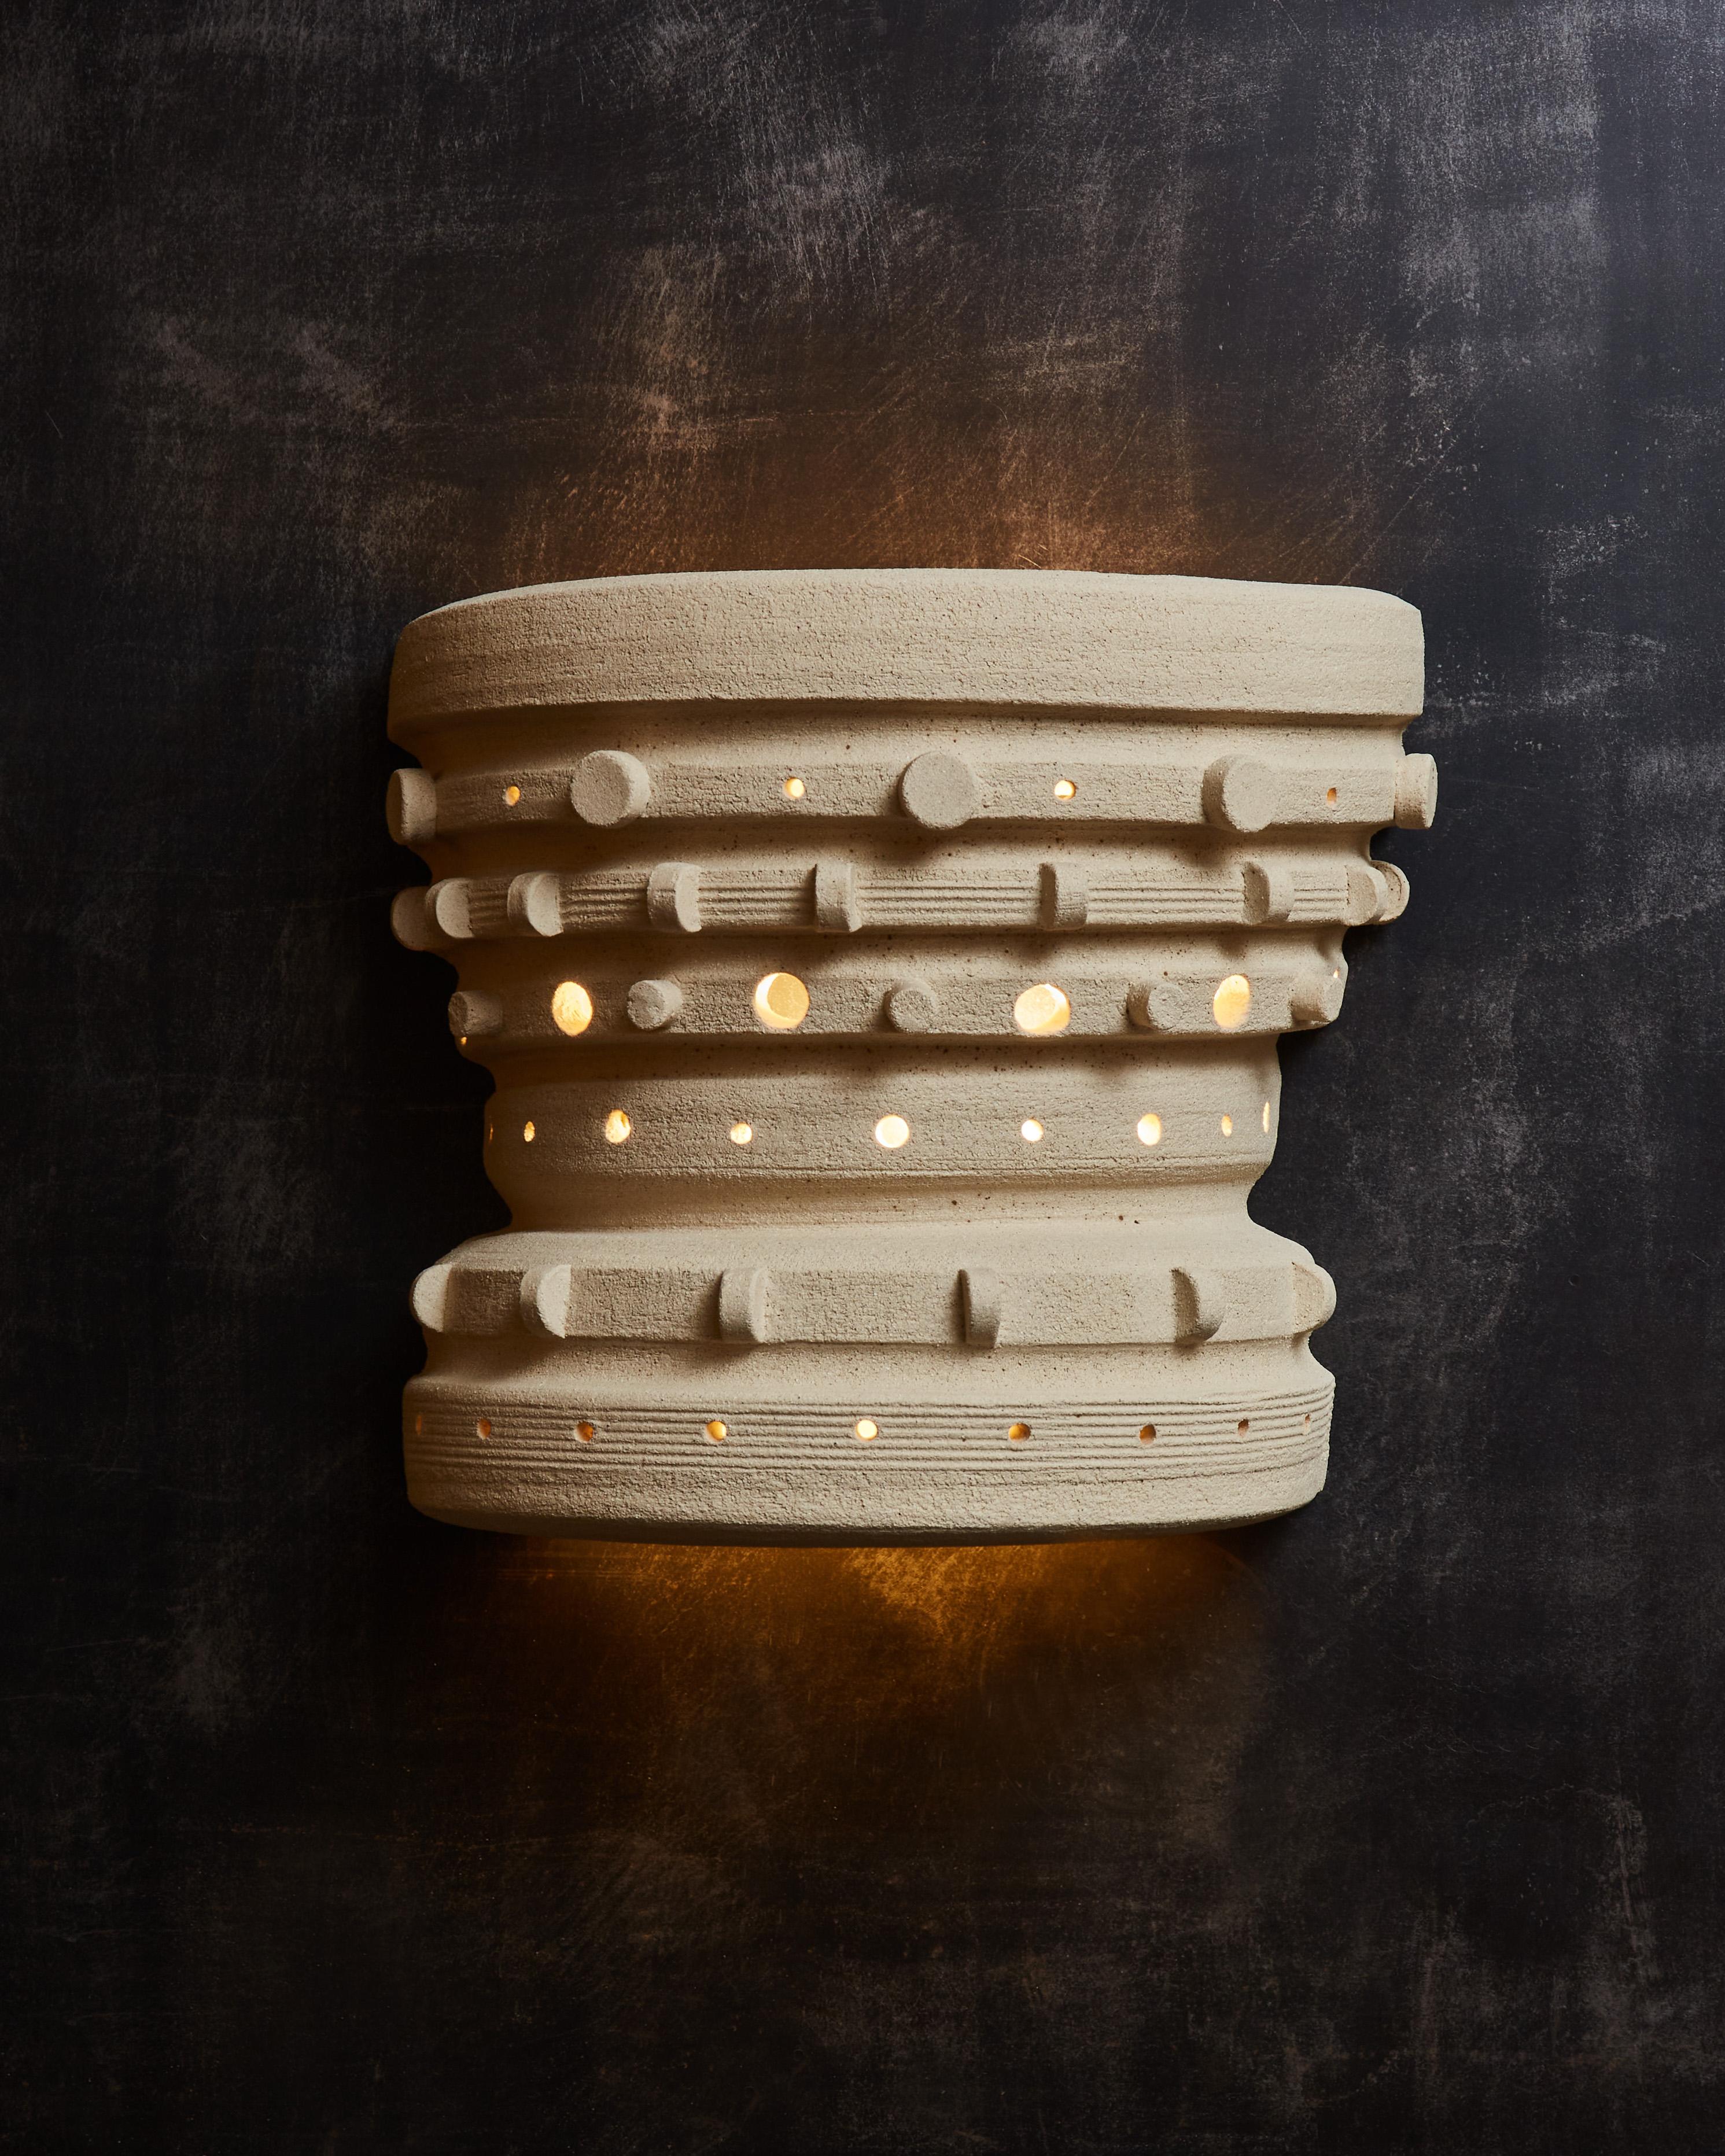 Crown shaped ceramic wall sconces made by the French artist Olivia Cognet.
Since moving to Los Angeles in 2016, French artist and desi- gner Olivia Cognet has focused on ceramics as the fertile medium through which she expresses her boundless